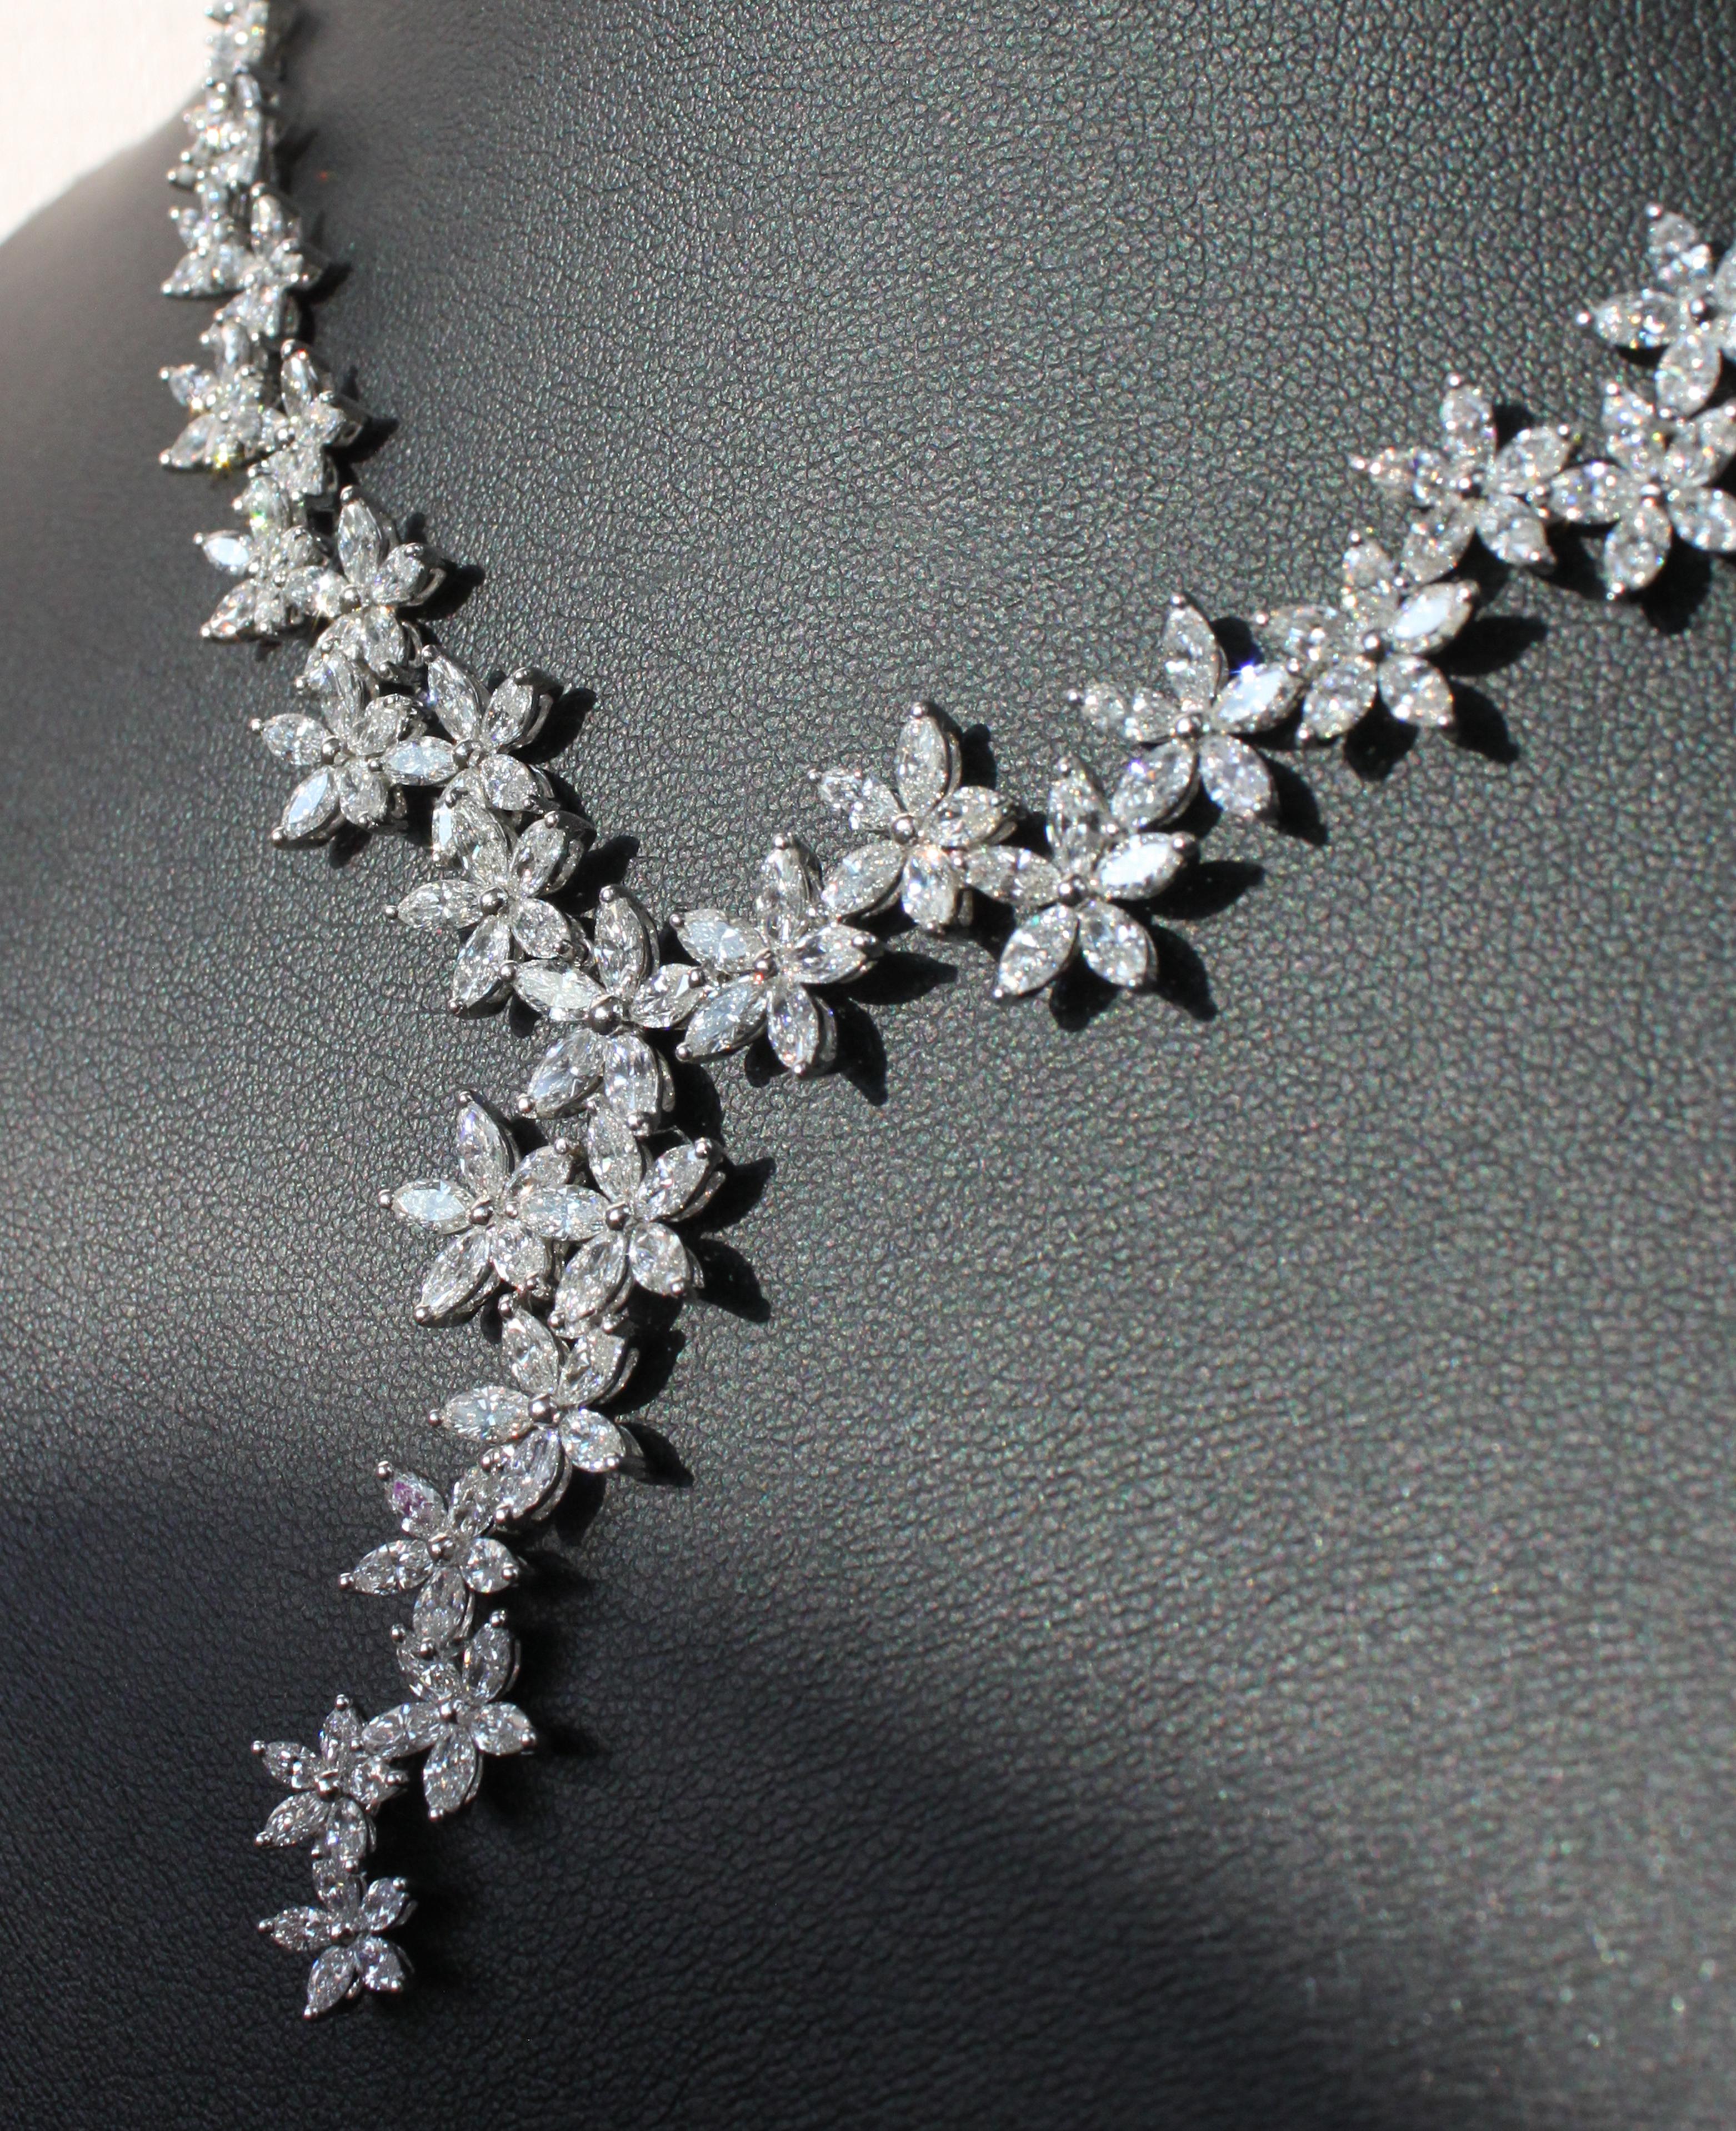 18K white gold
9.50ct natural marquise VS-SI diamonds
Total necklace weight 29.91 g

Crafted with unrivaled craftsmanship, this extravagant necklace embodies opulence and sophistication. Fashioned in luxurious 18K white gold, its design is a